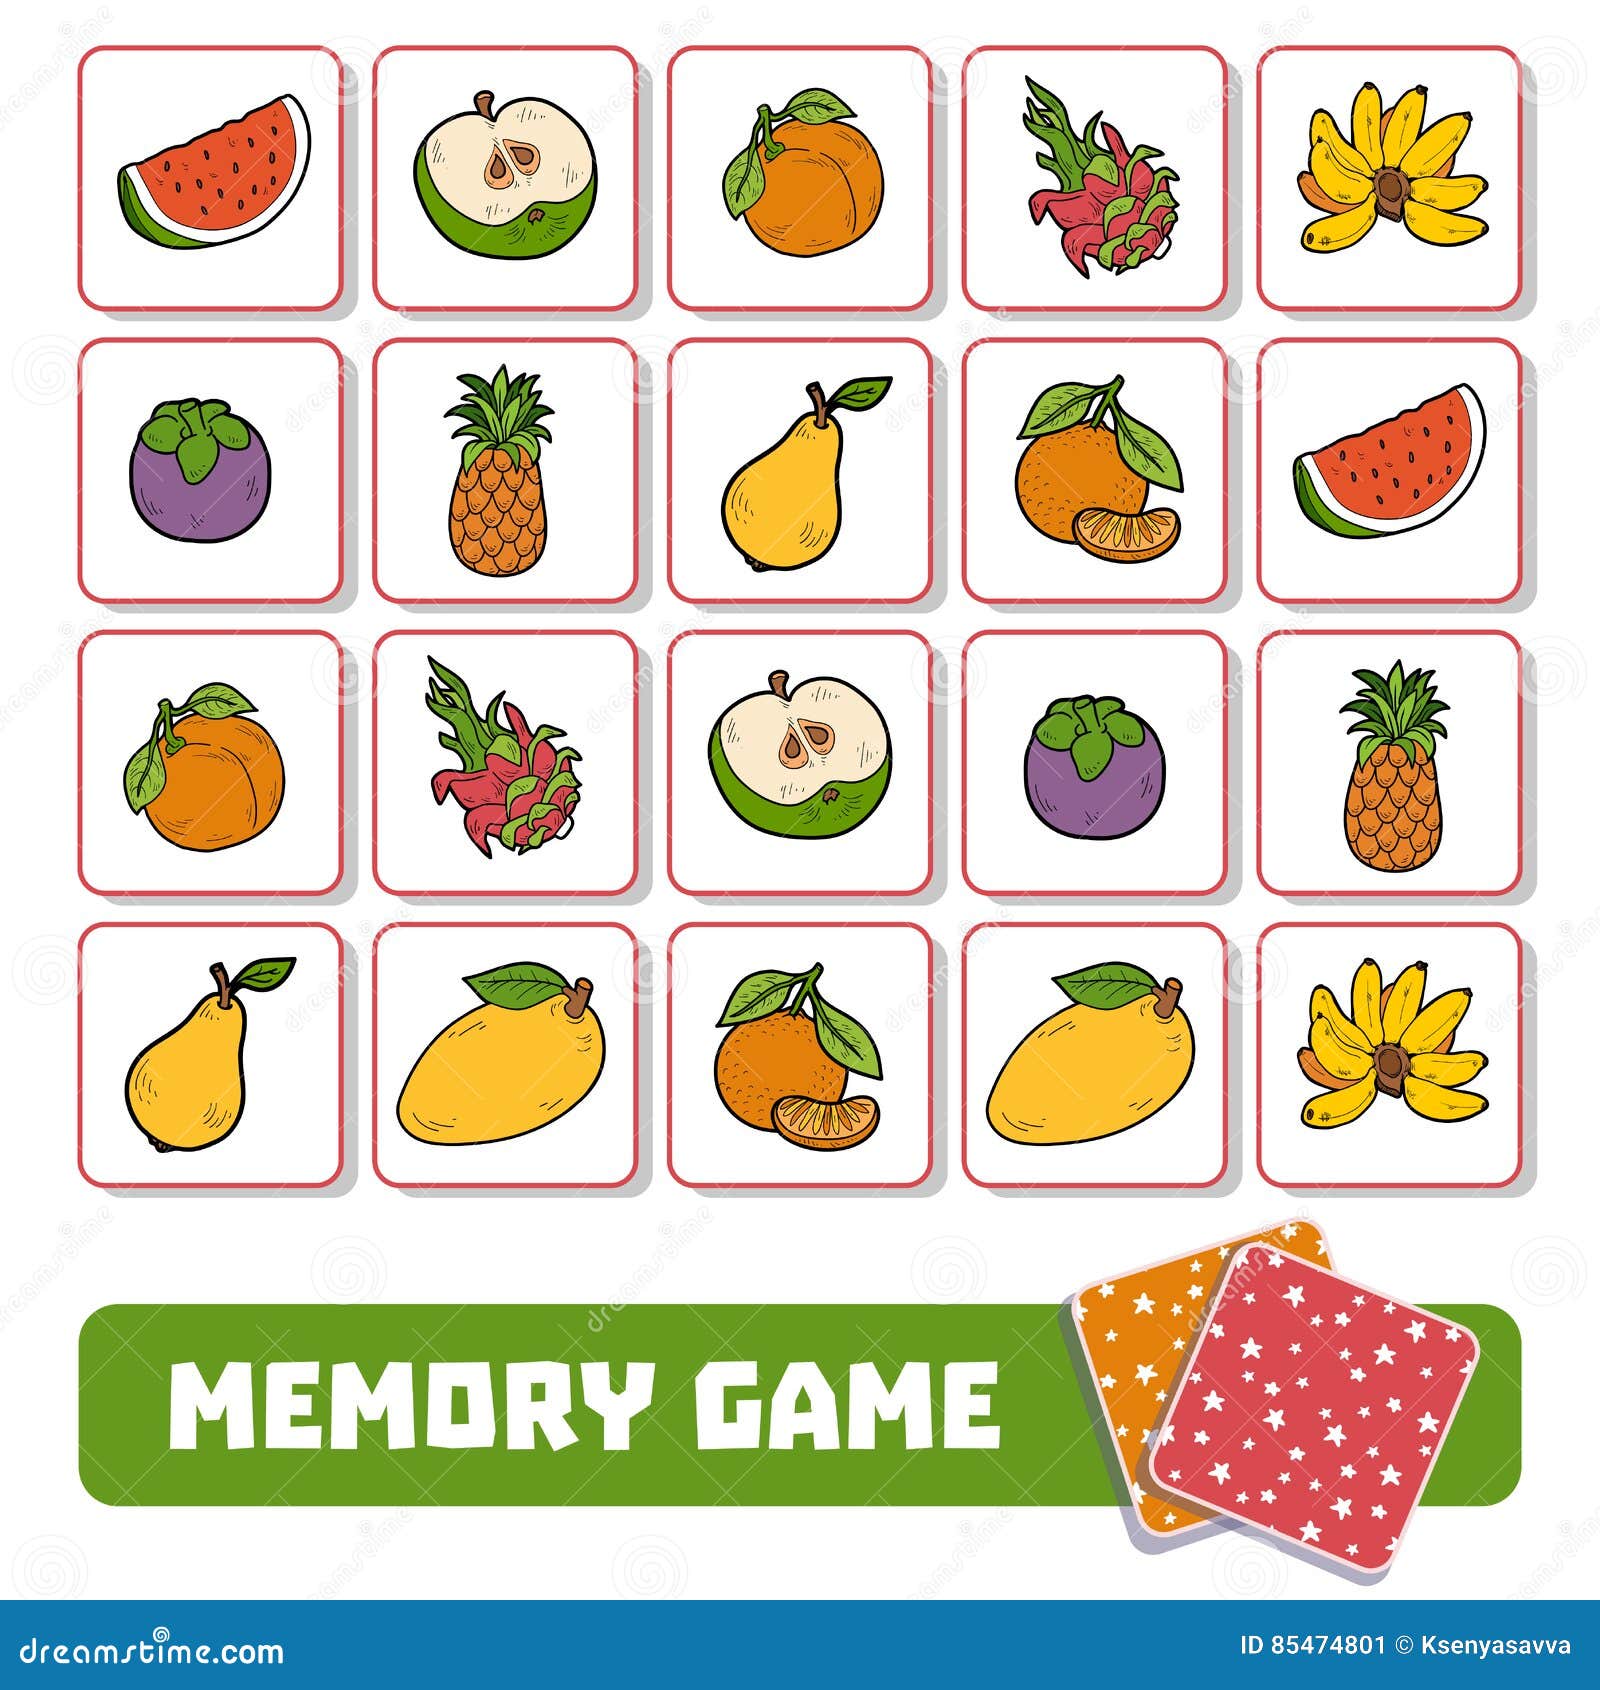 Memory Game For Children, Cards With Vegetables Cartoon ...